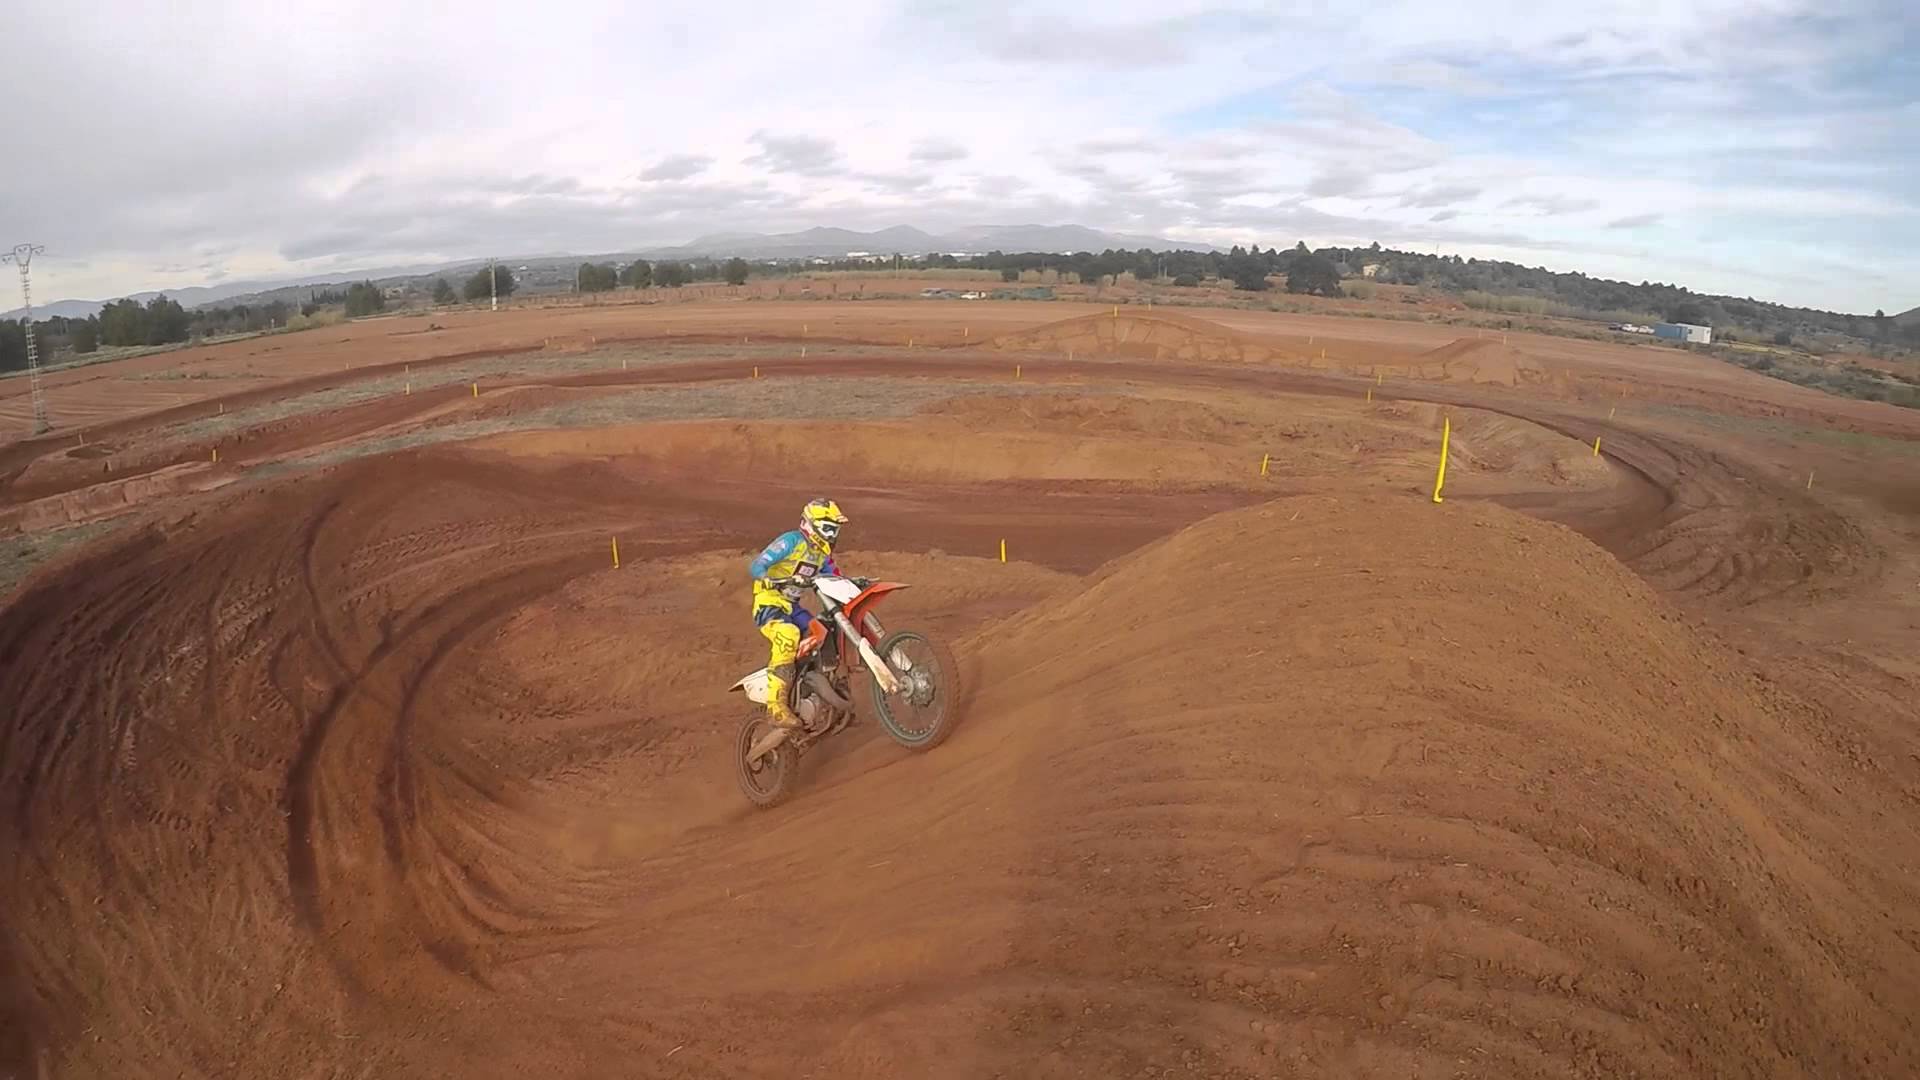 GoPro Hero 4] RedSand Mx Park - Track 3 - Hot lap with Kevin Horgmo ...